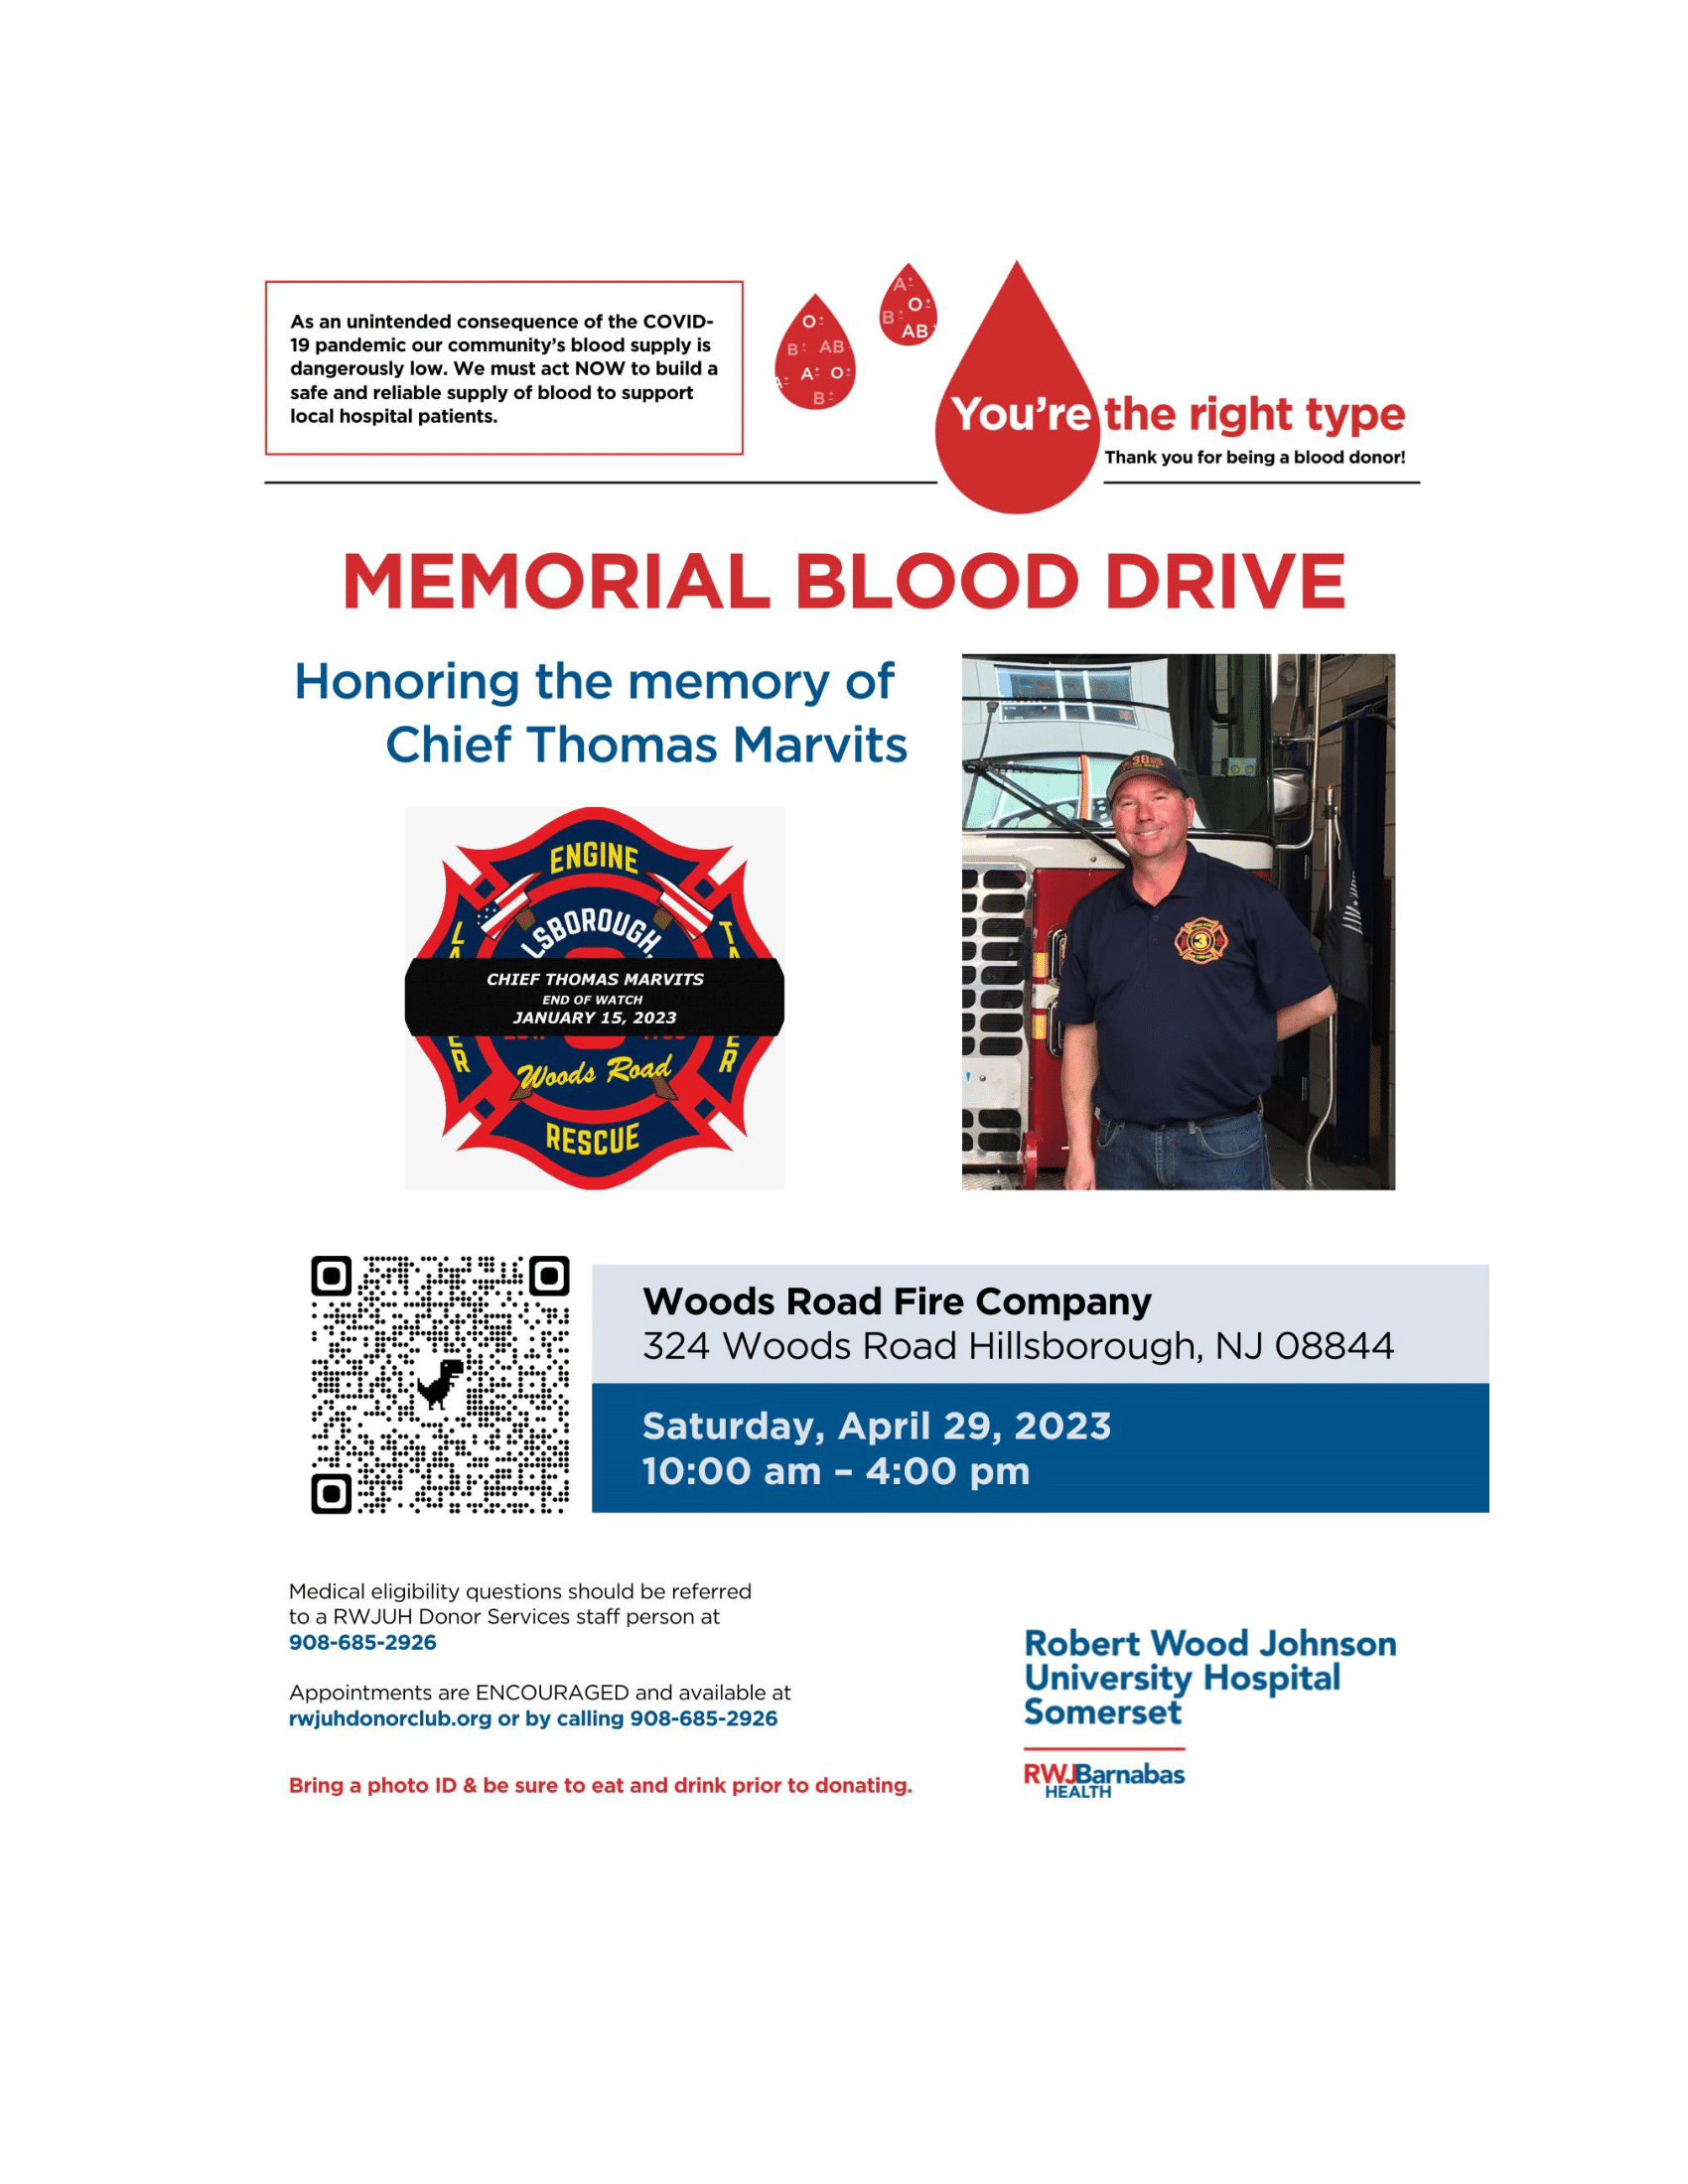 Blood Drive in Memory of Chief Marvits 1